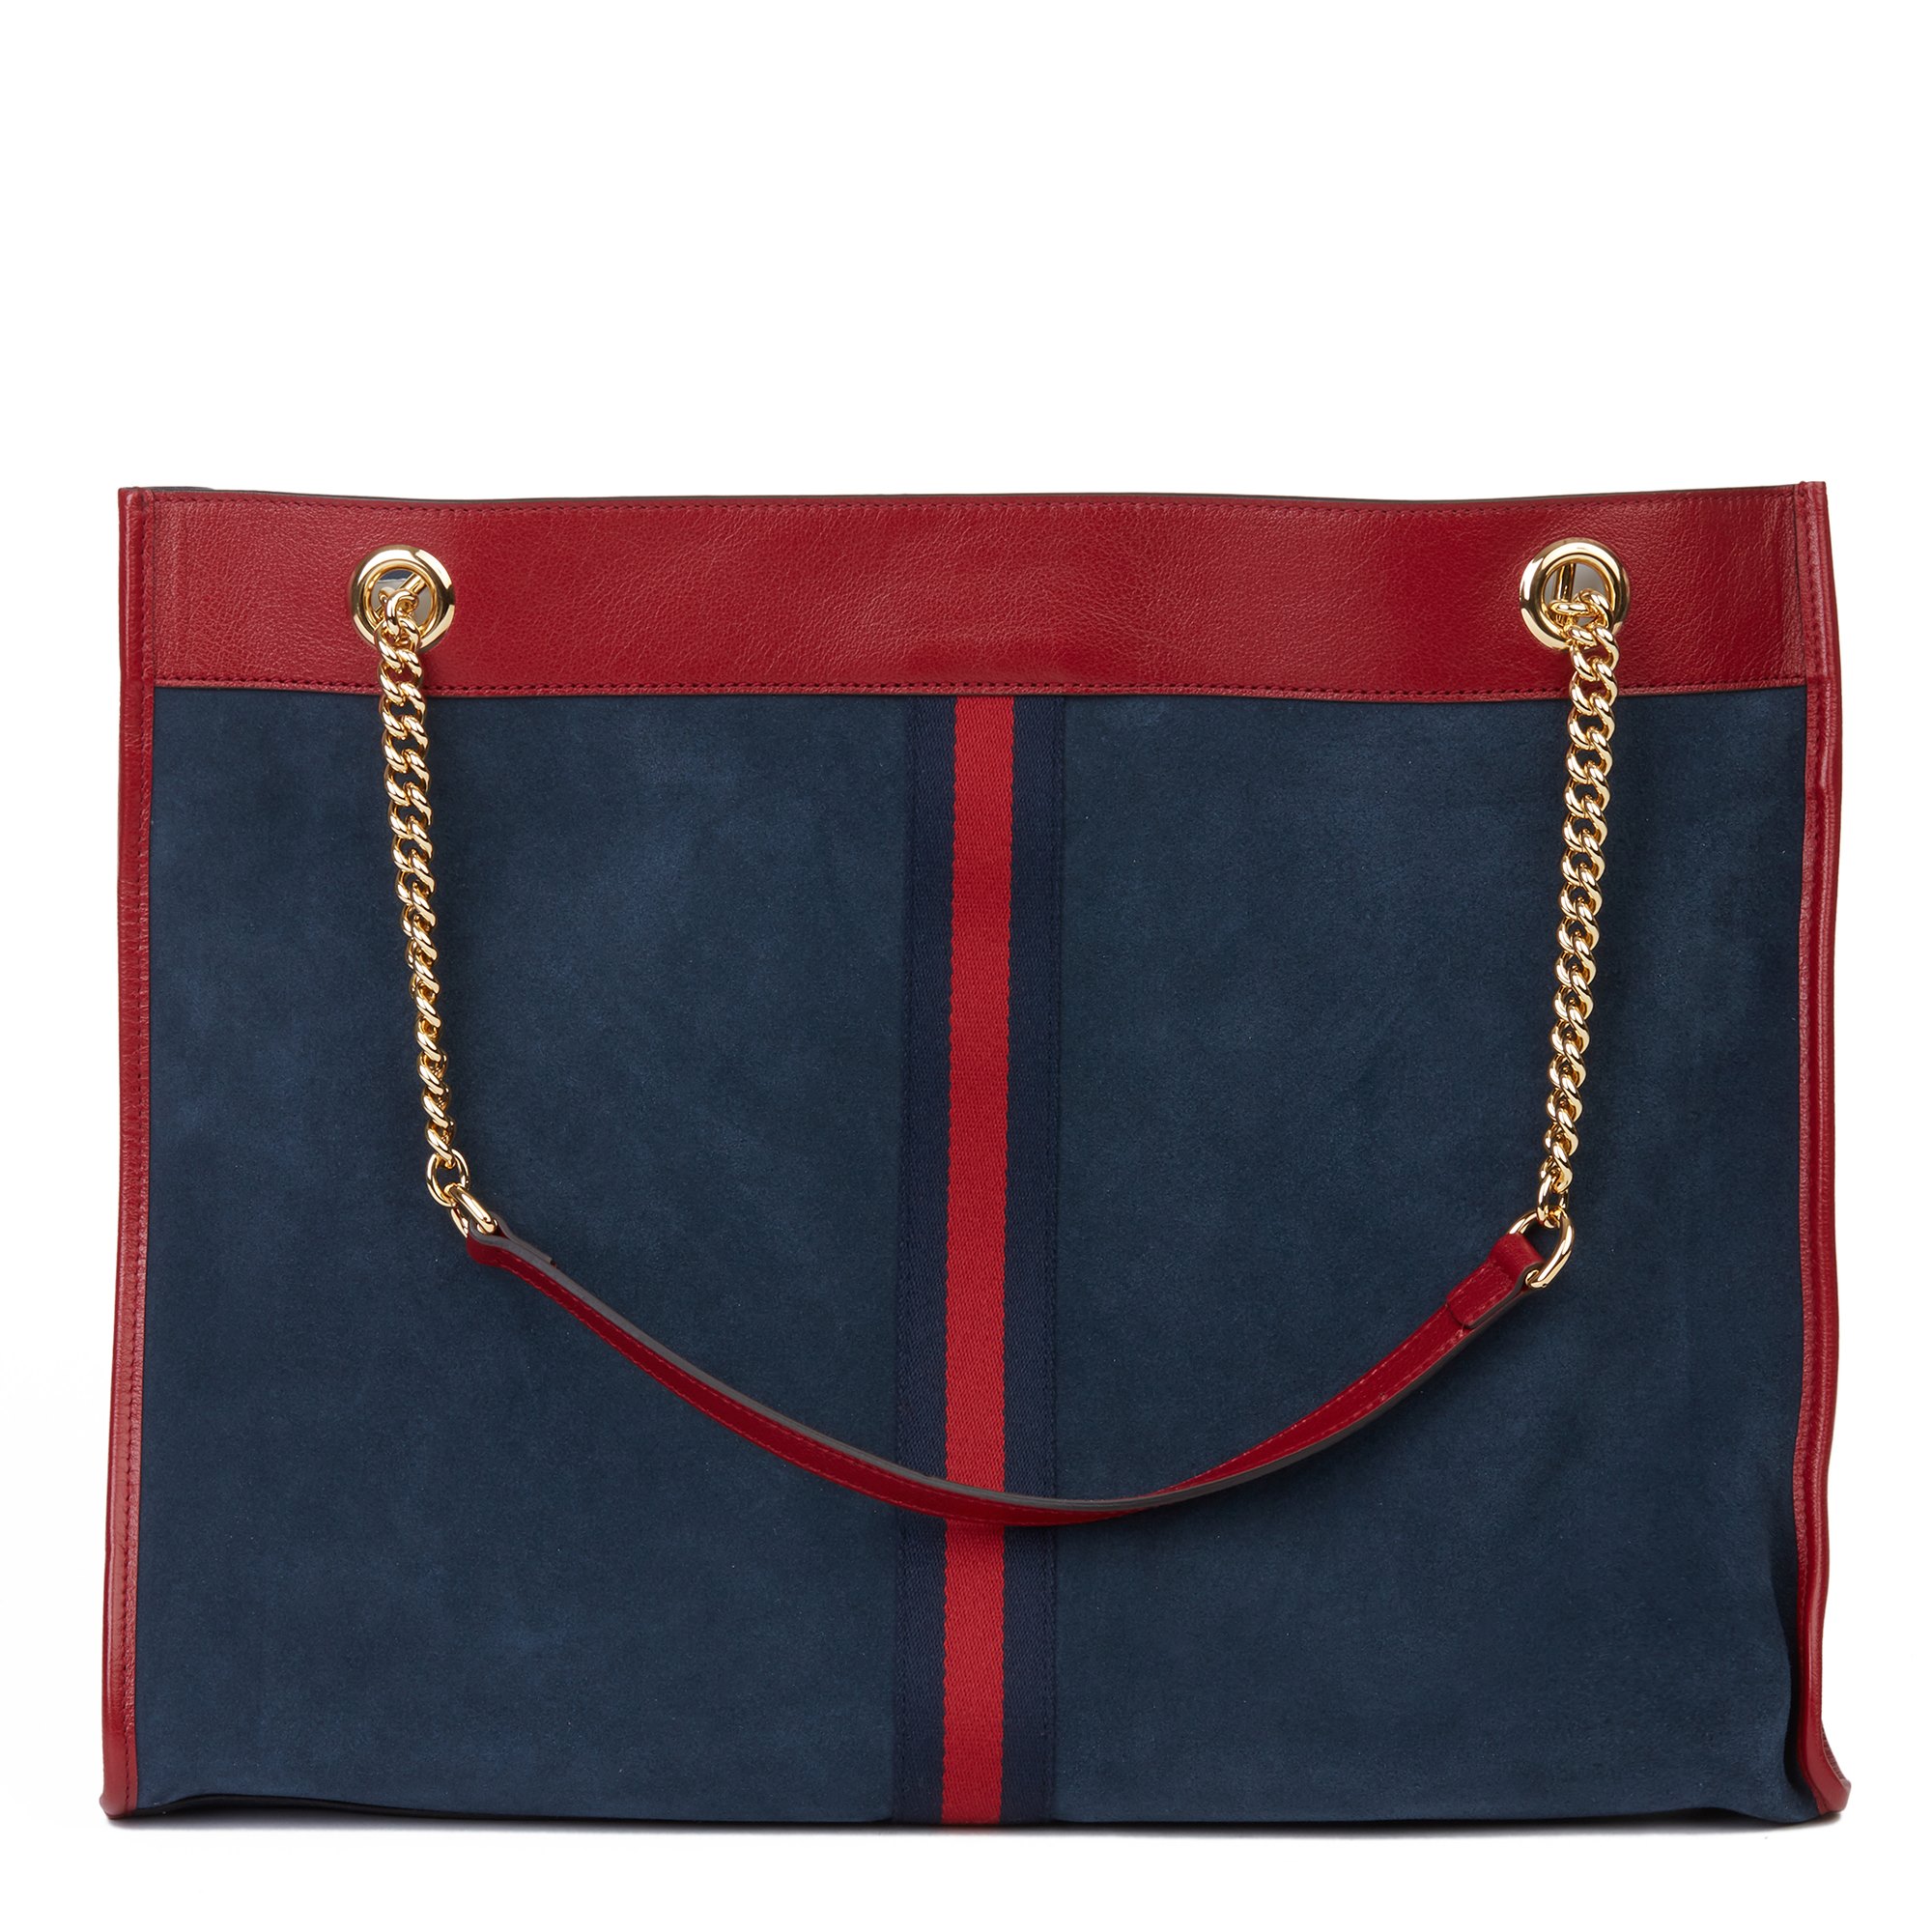 Gucci Red Aged Calfskin Leather & Blue Suede Web Large Rajah Tote